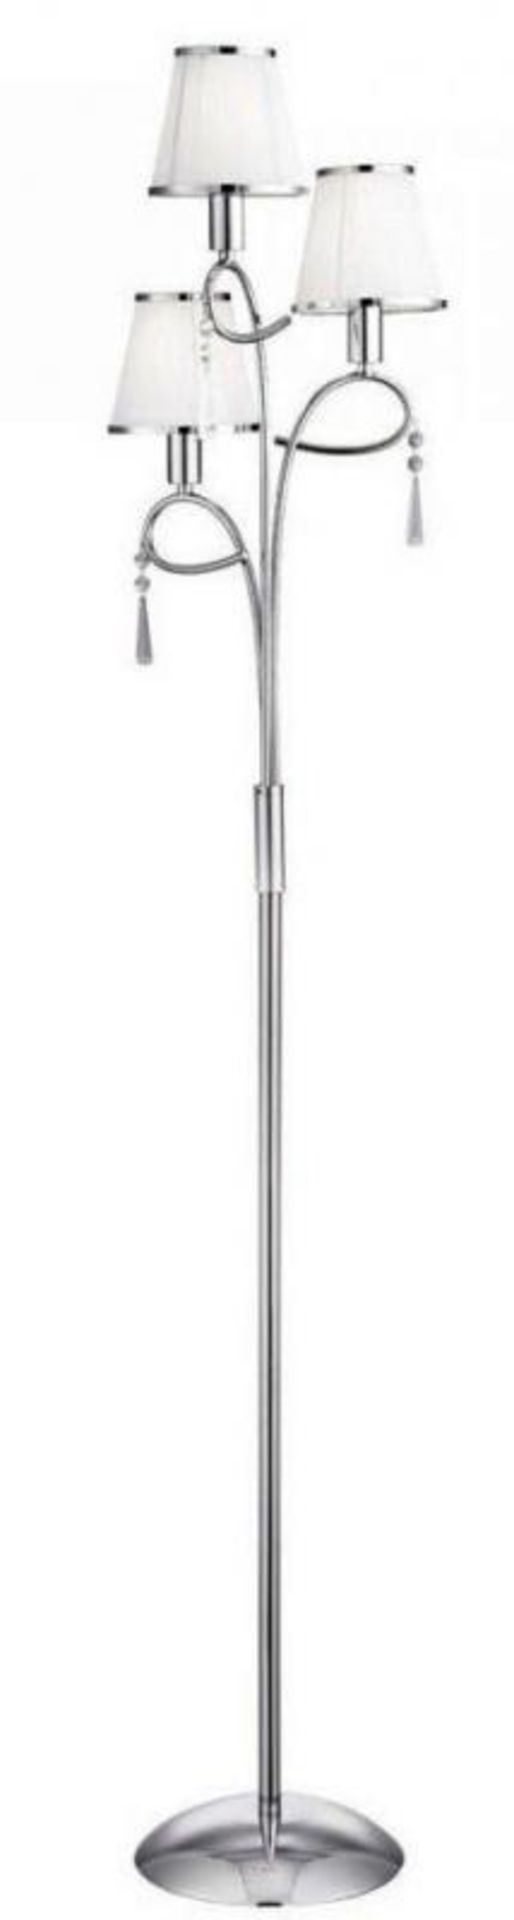 1 x Simplicity Polished Chrome 3 Light Floor Lamp With White String Lamp Shades - 240v - Height 159c - Image 3 of 3